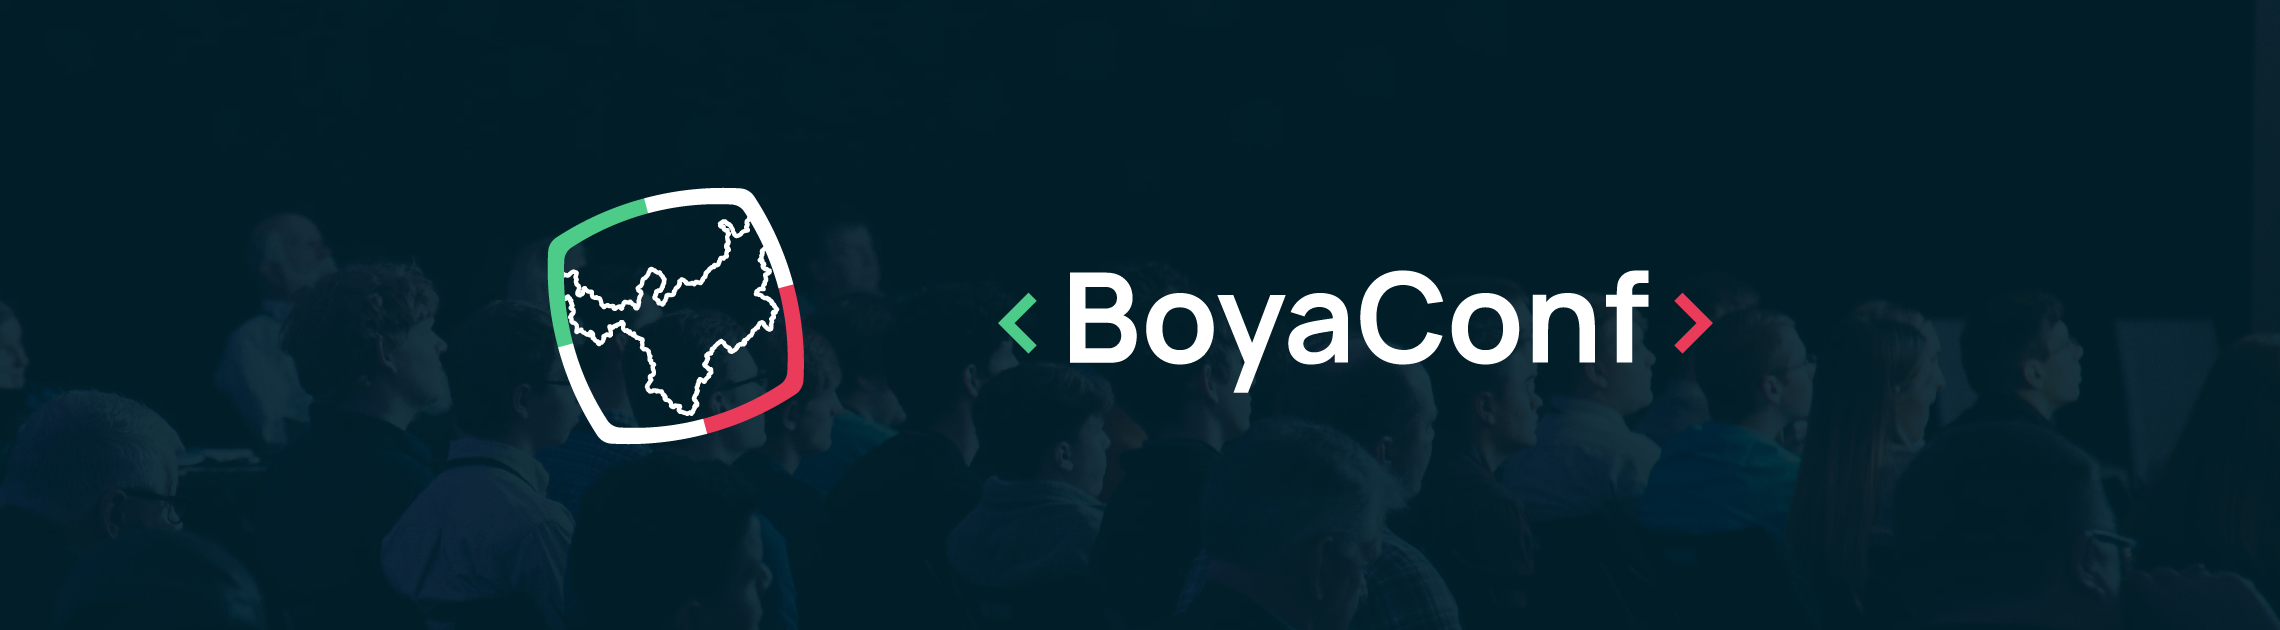 boyaconf-banner-sessionize.png